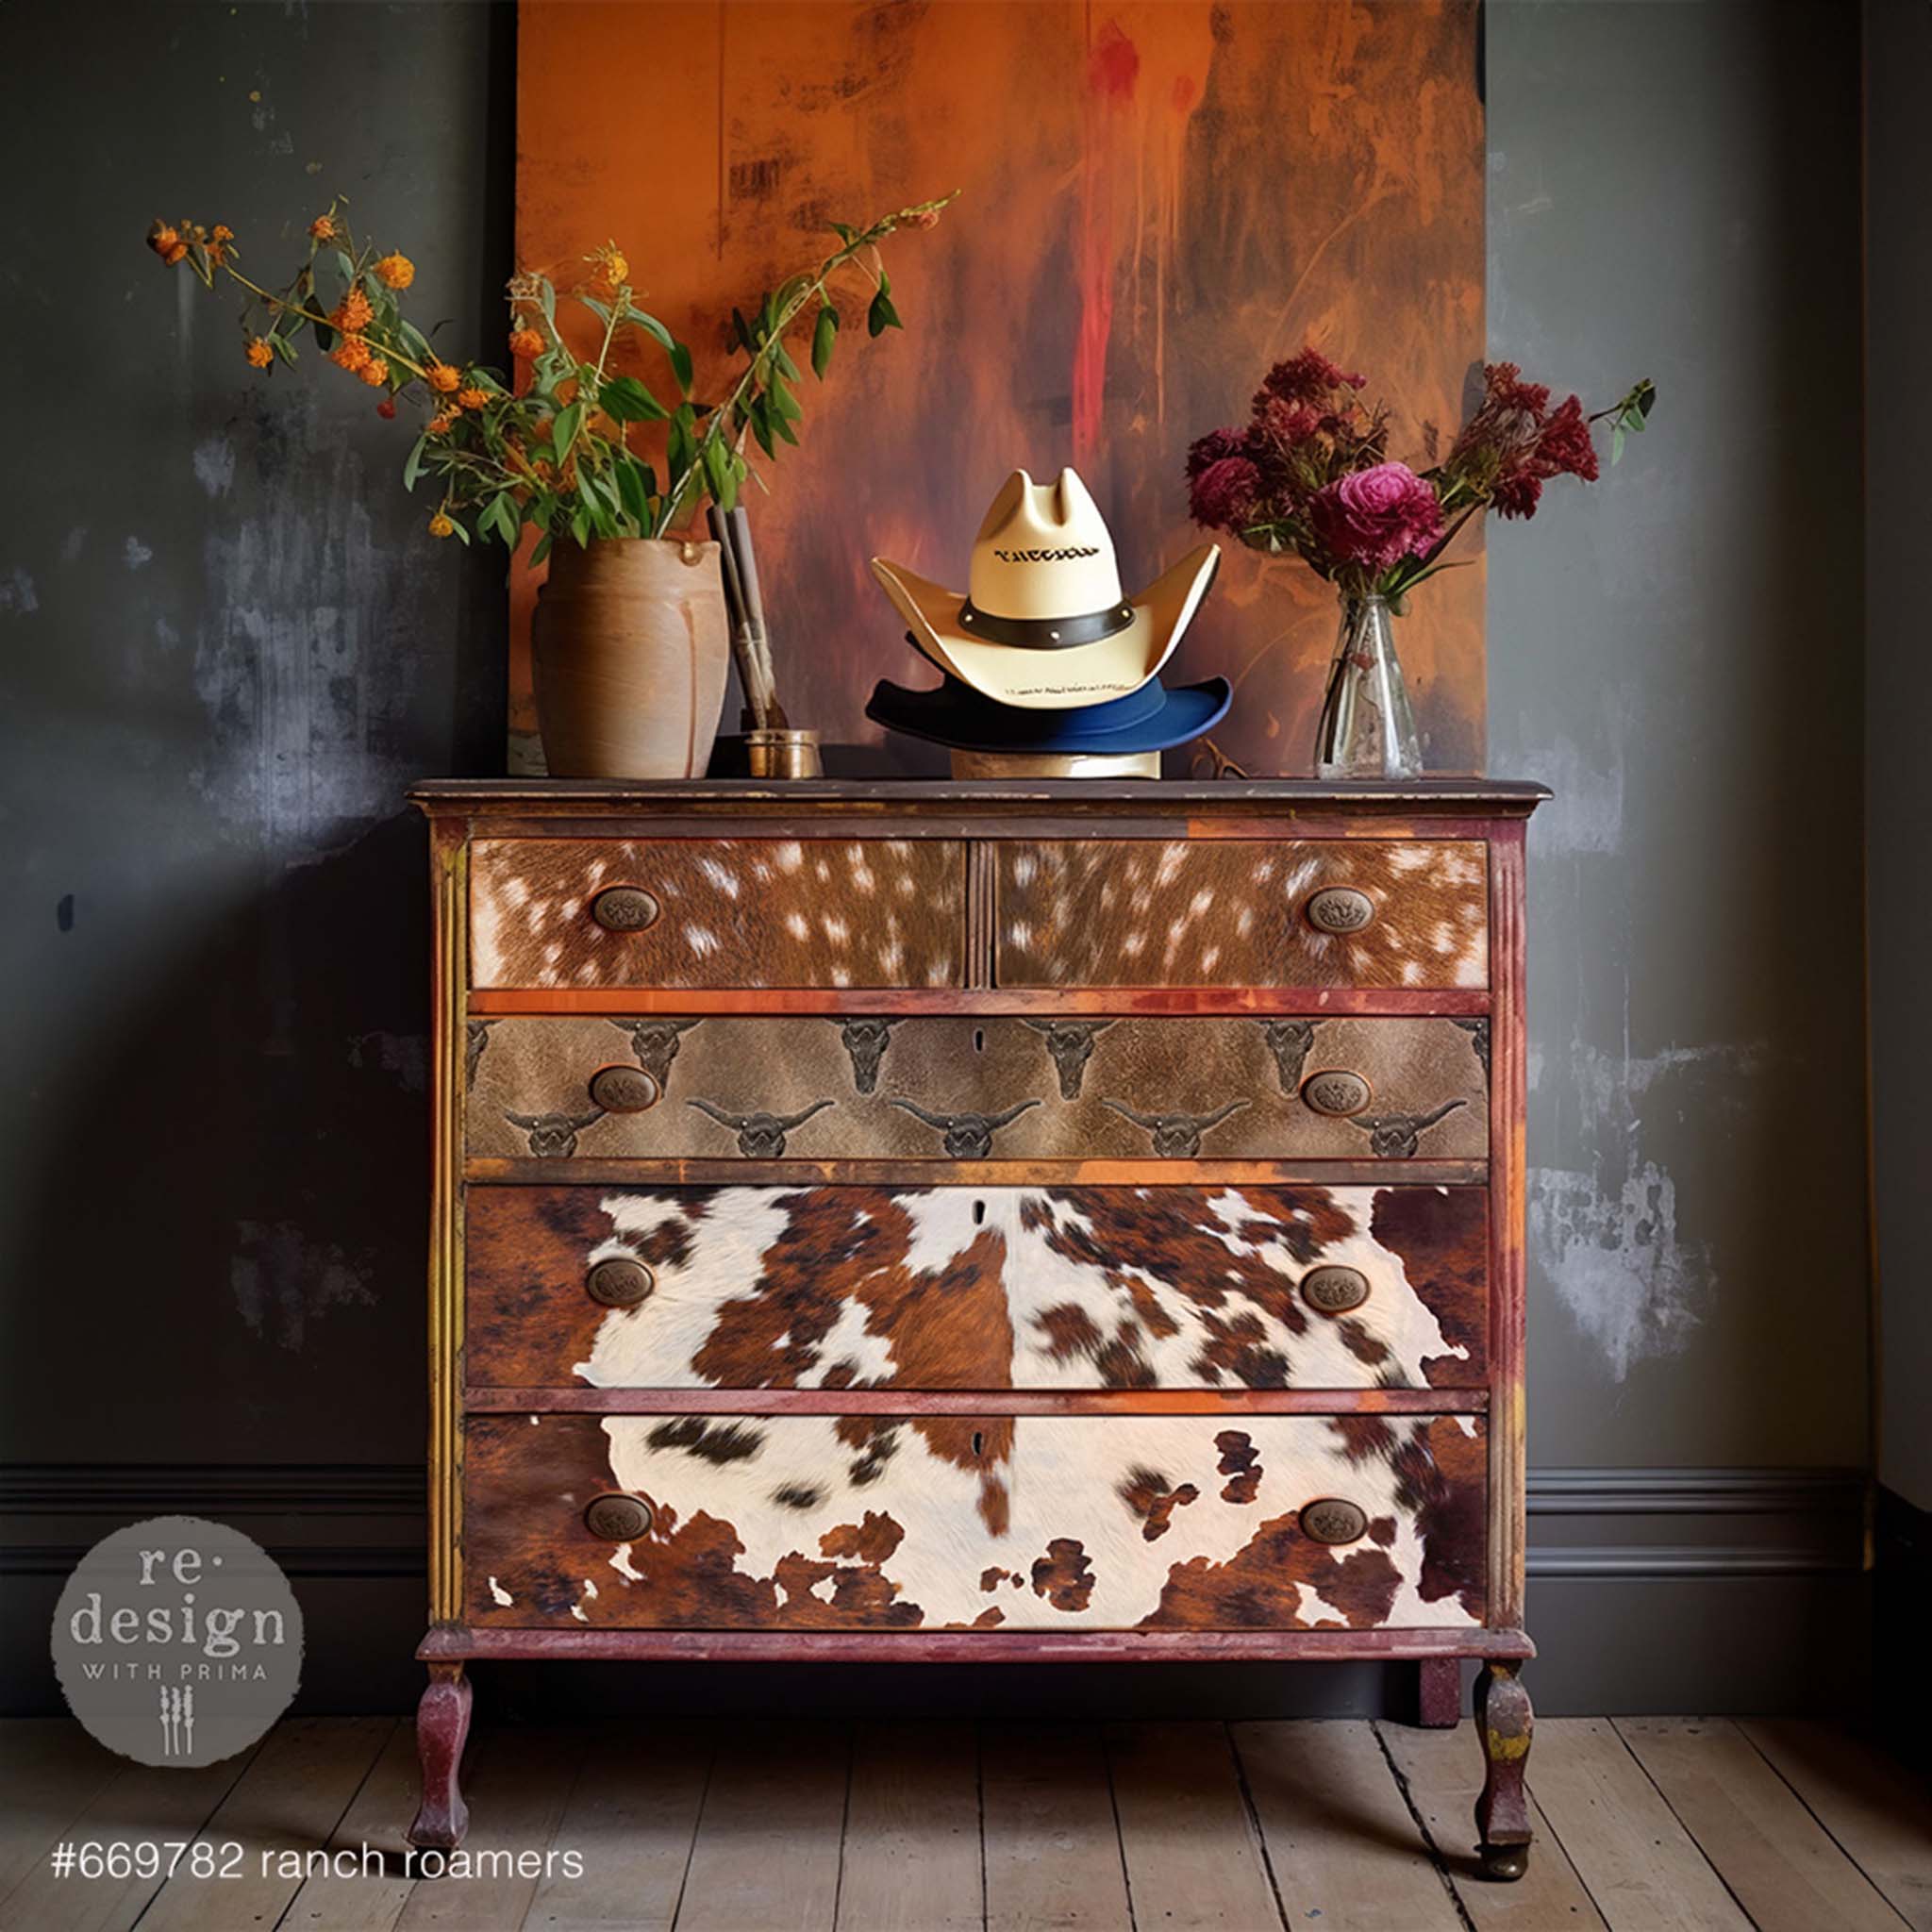 A vintage 5-drawer dresser is painted in a blend of browns and features ReDesign with Prima's Ranch Roamers tissue paper on the drawers.